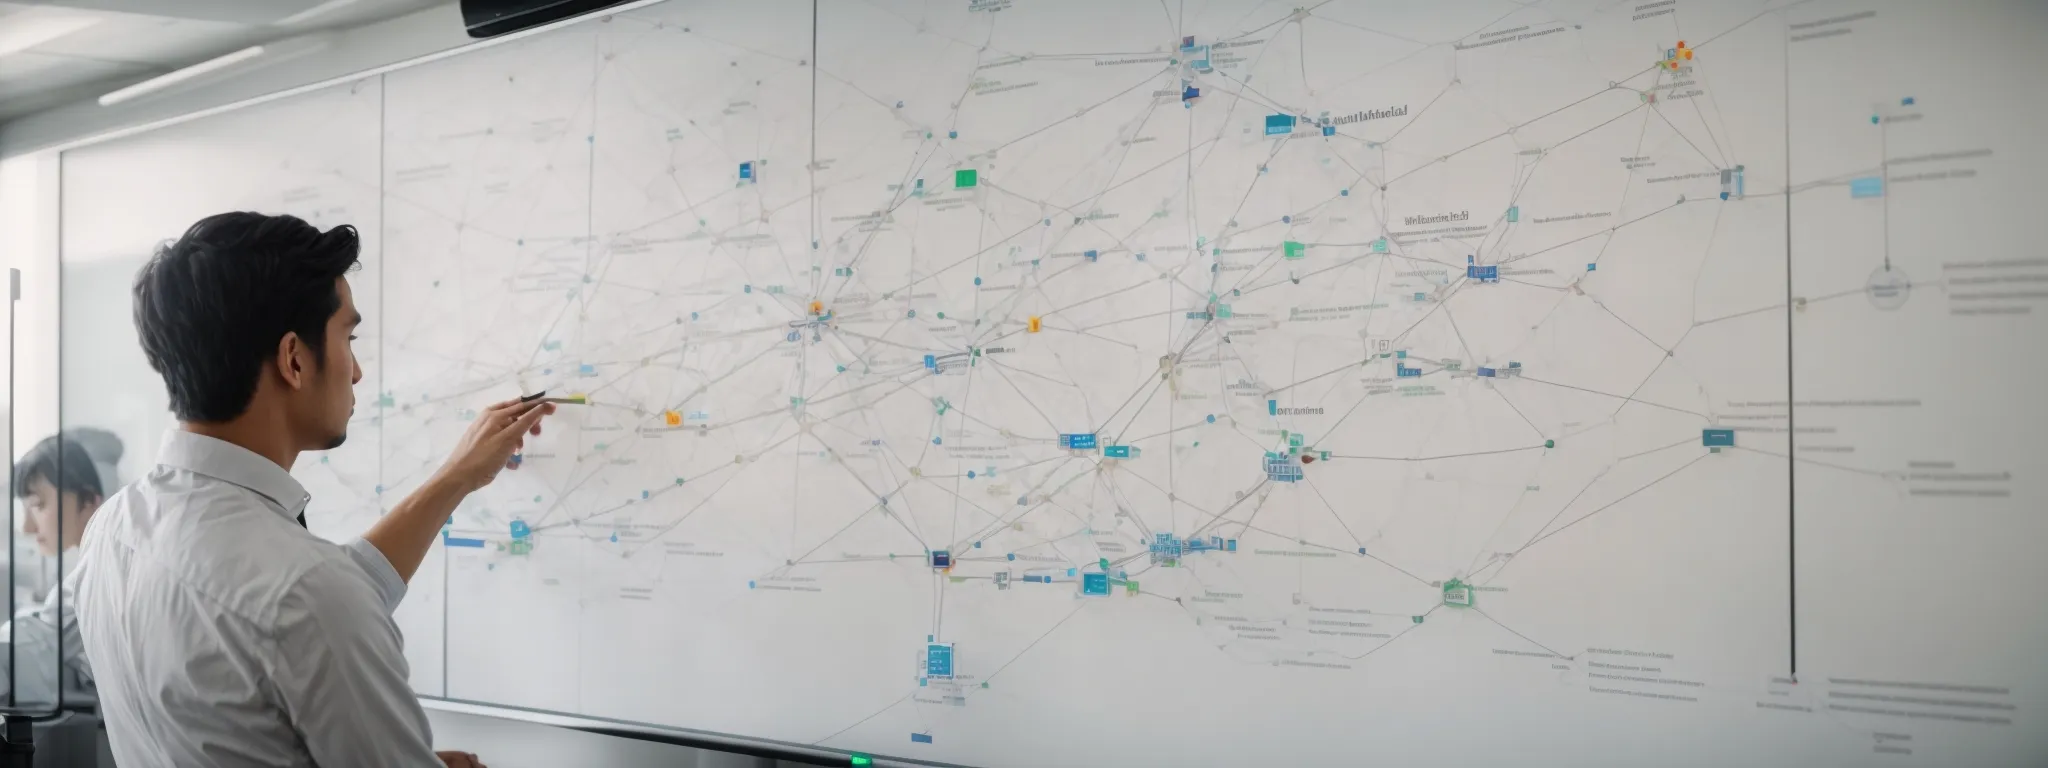 a webmaster attentively maps out a complex network of interconnected nodes on a whiteboard, representing a website's internal link architecture.